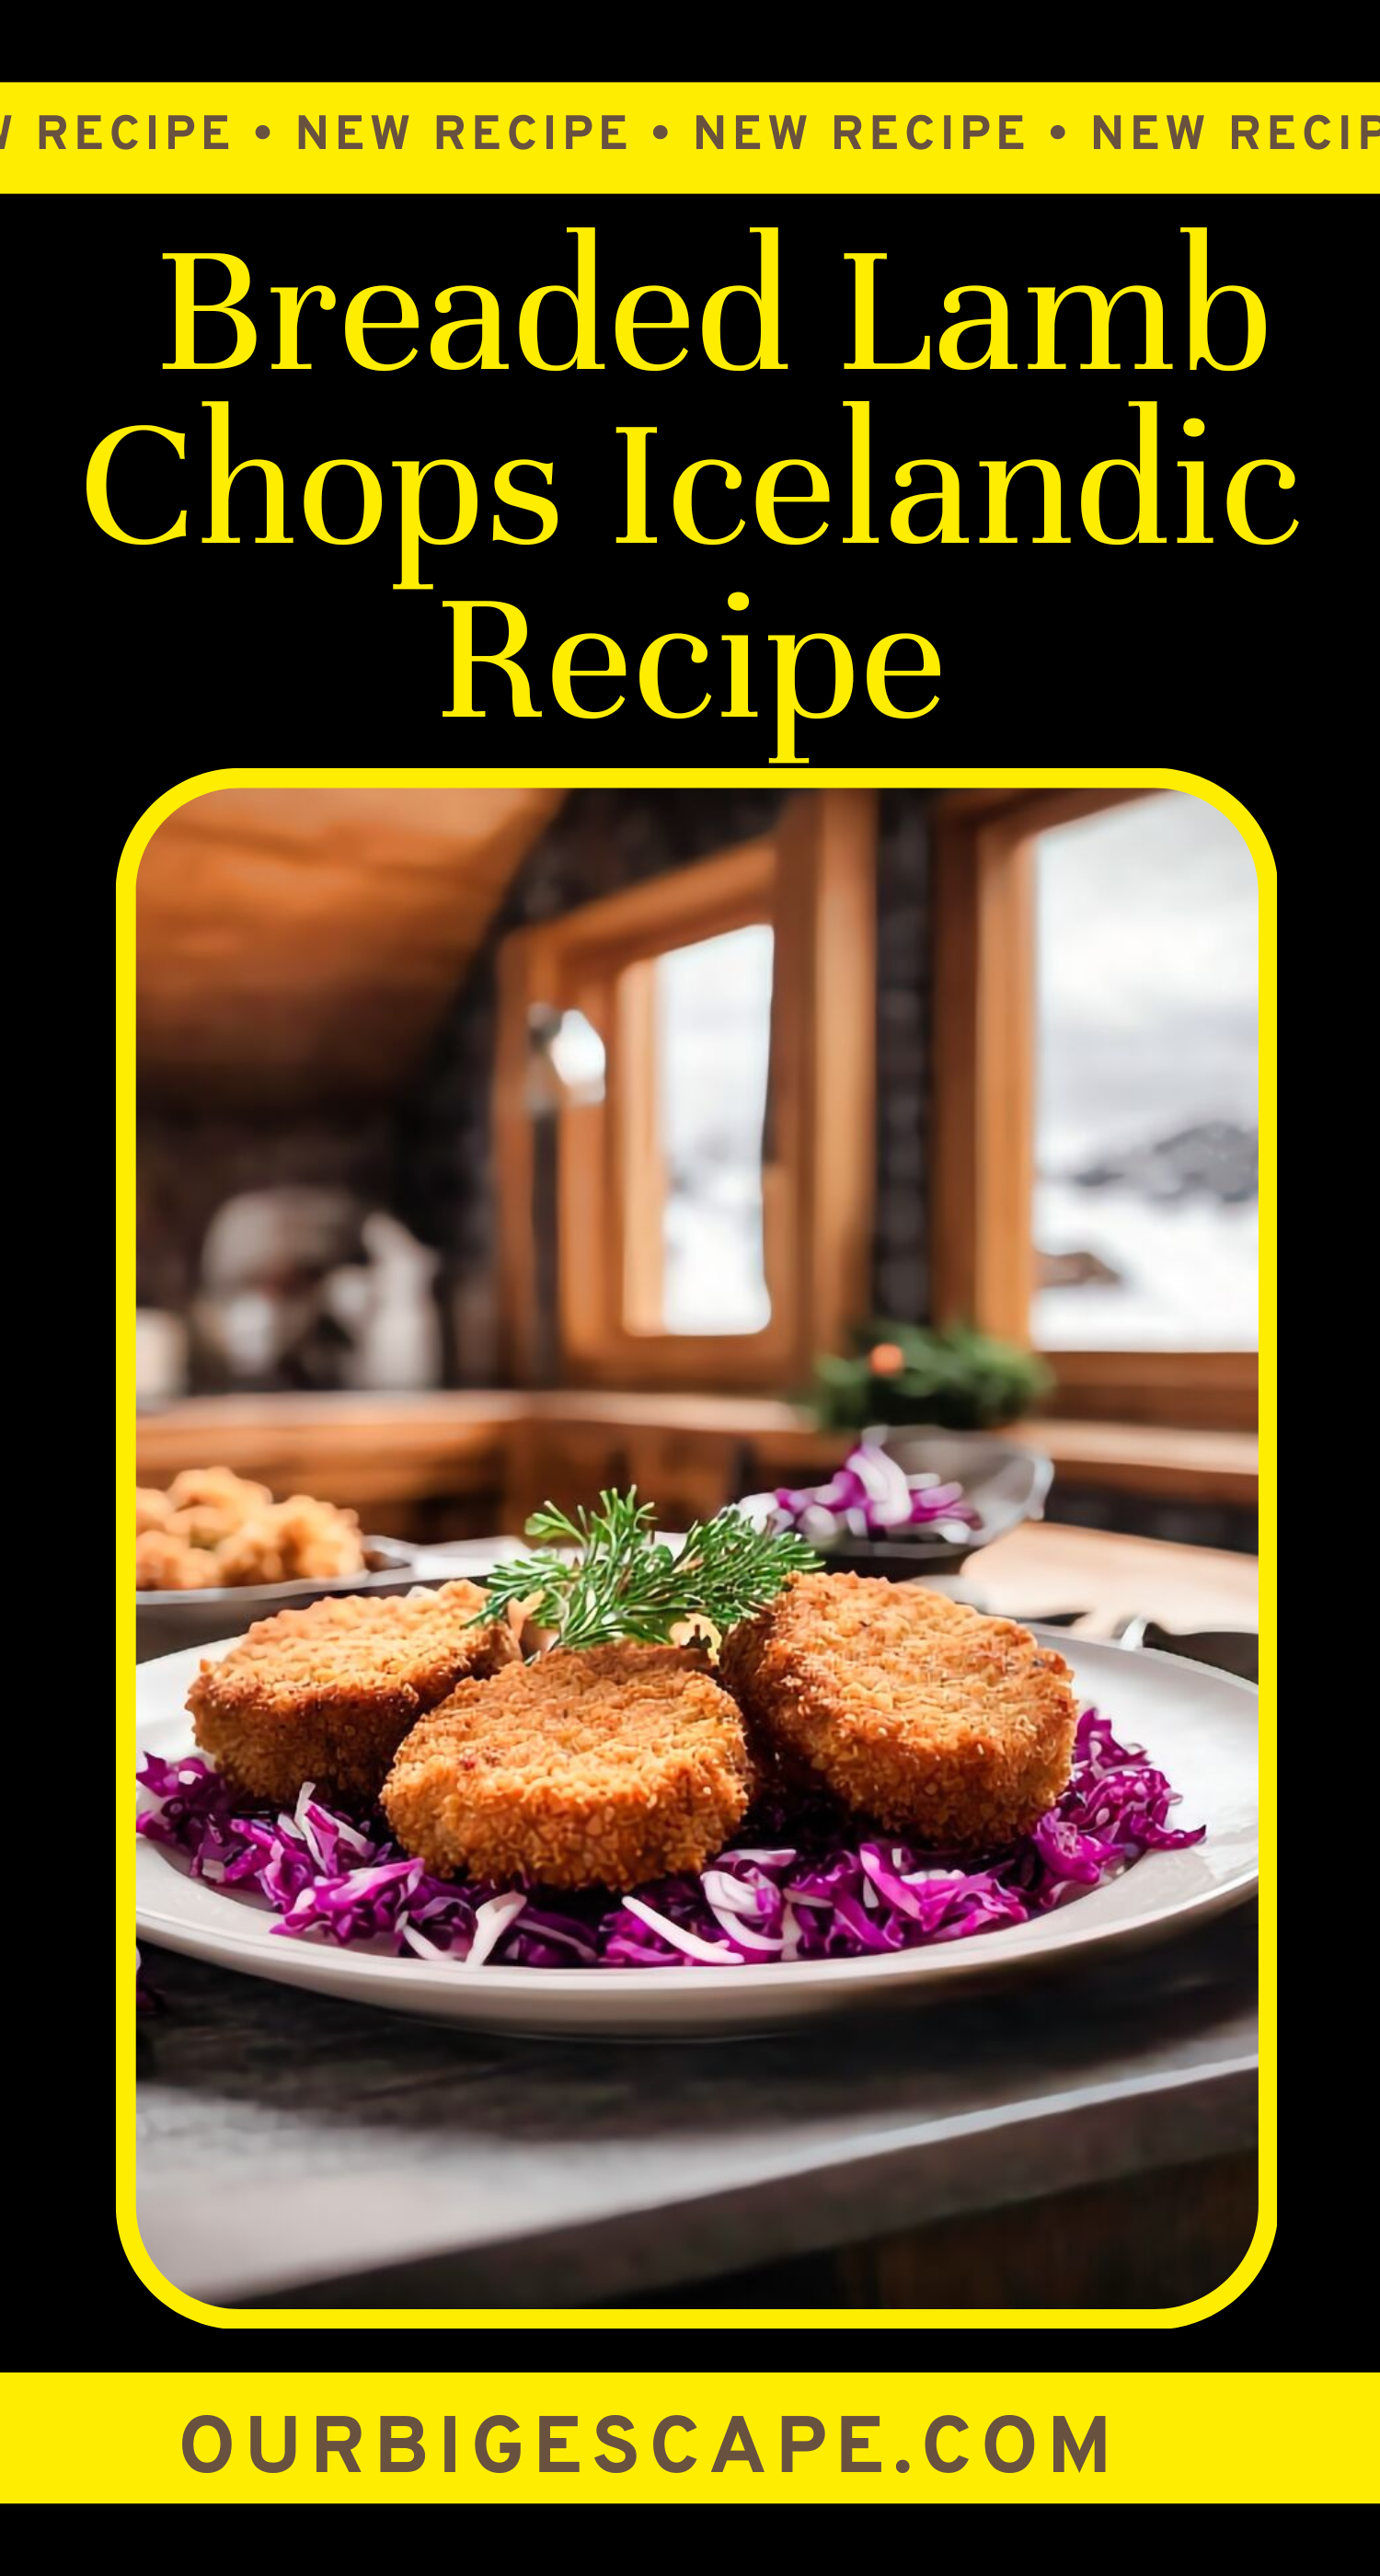 Icelandic Breaded Lamb Chops with Spiced Red Cabbage Recipe